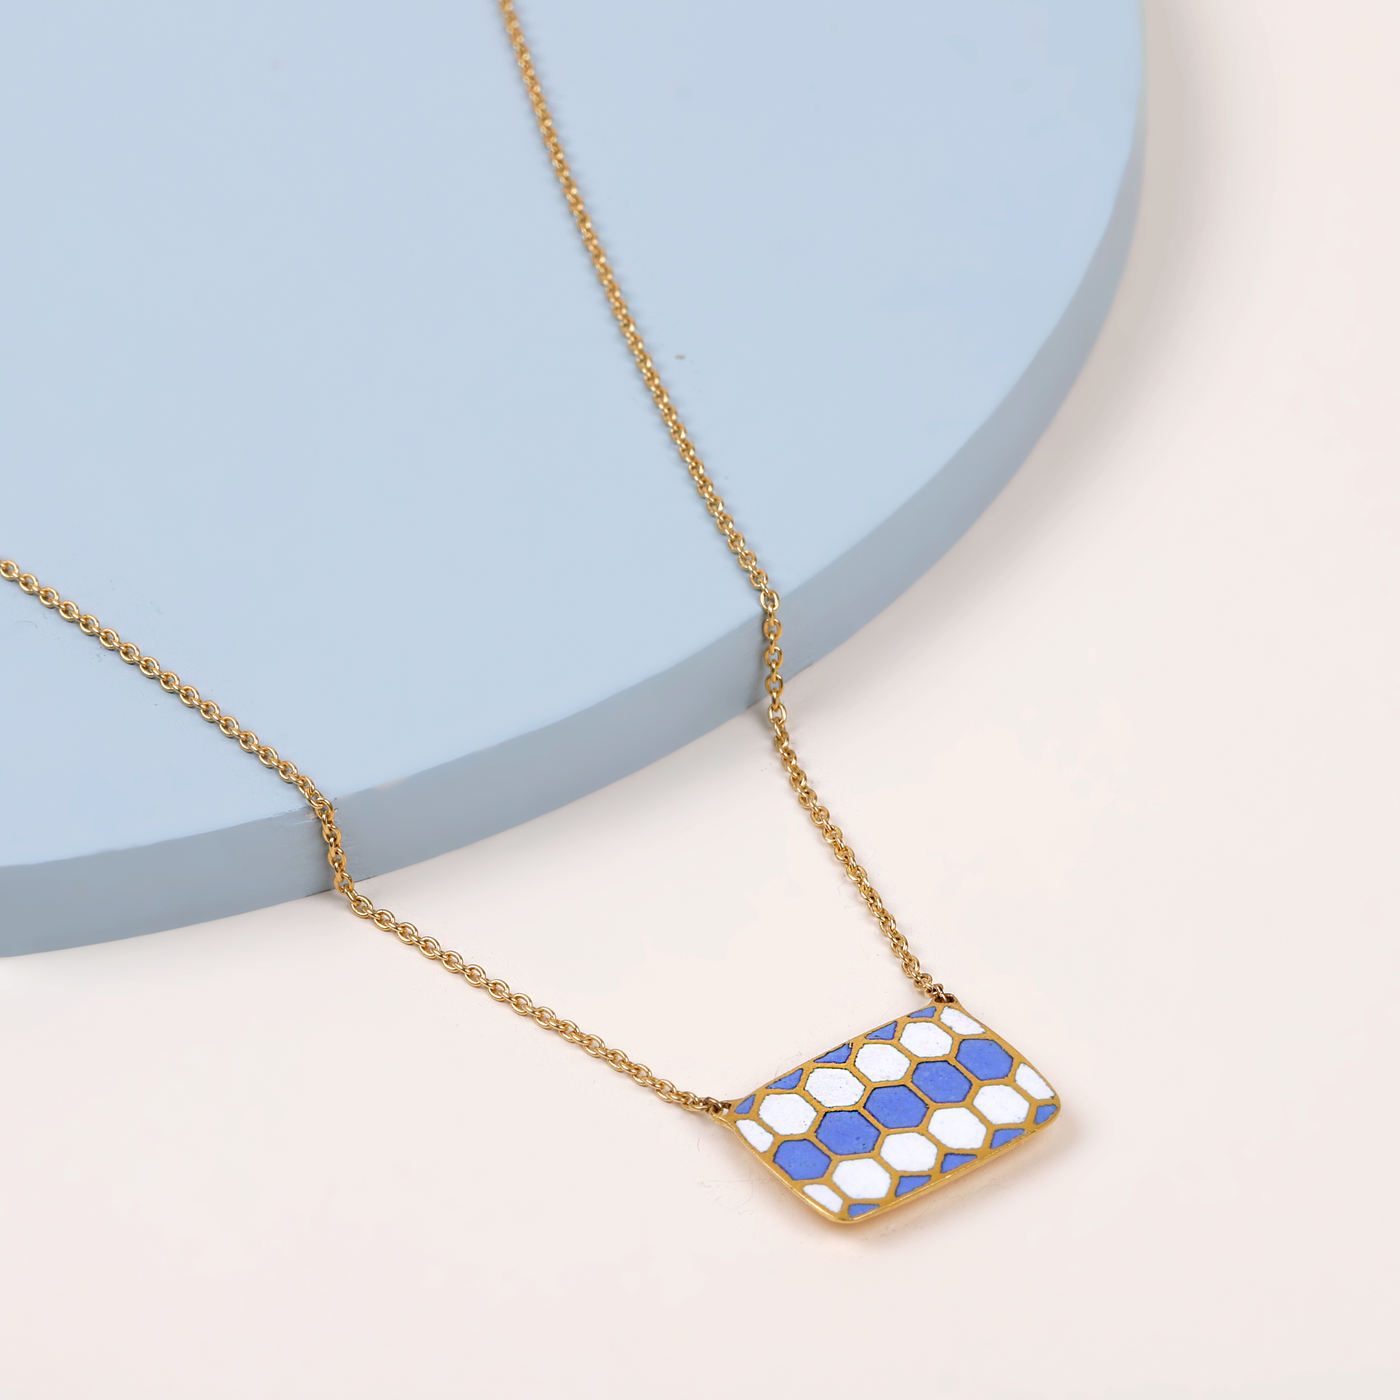 Enamel 22K Gold Pendant And Chain